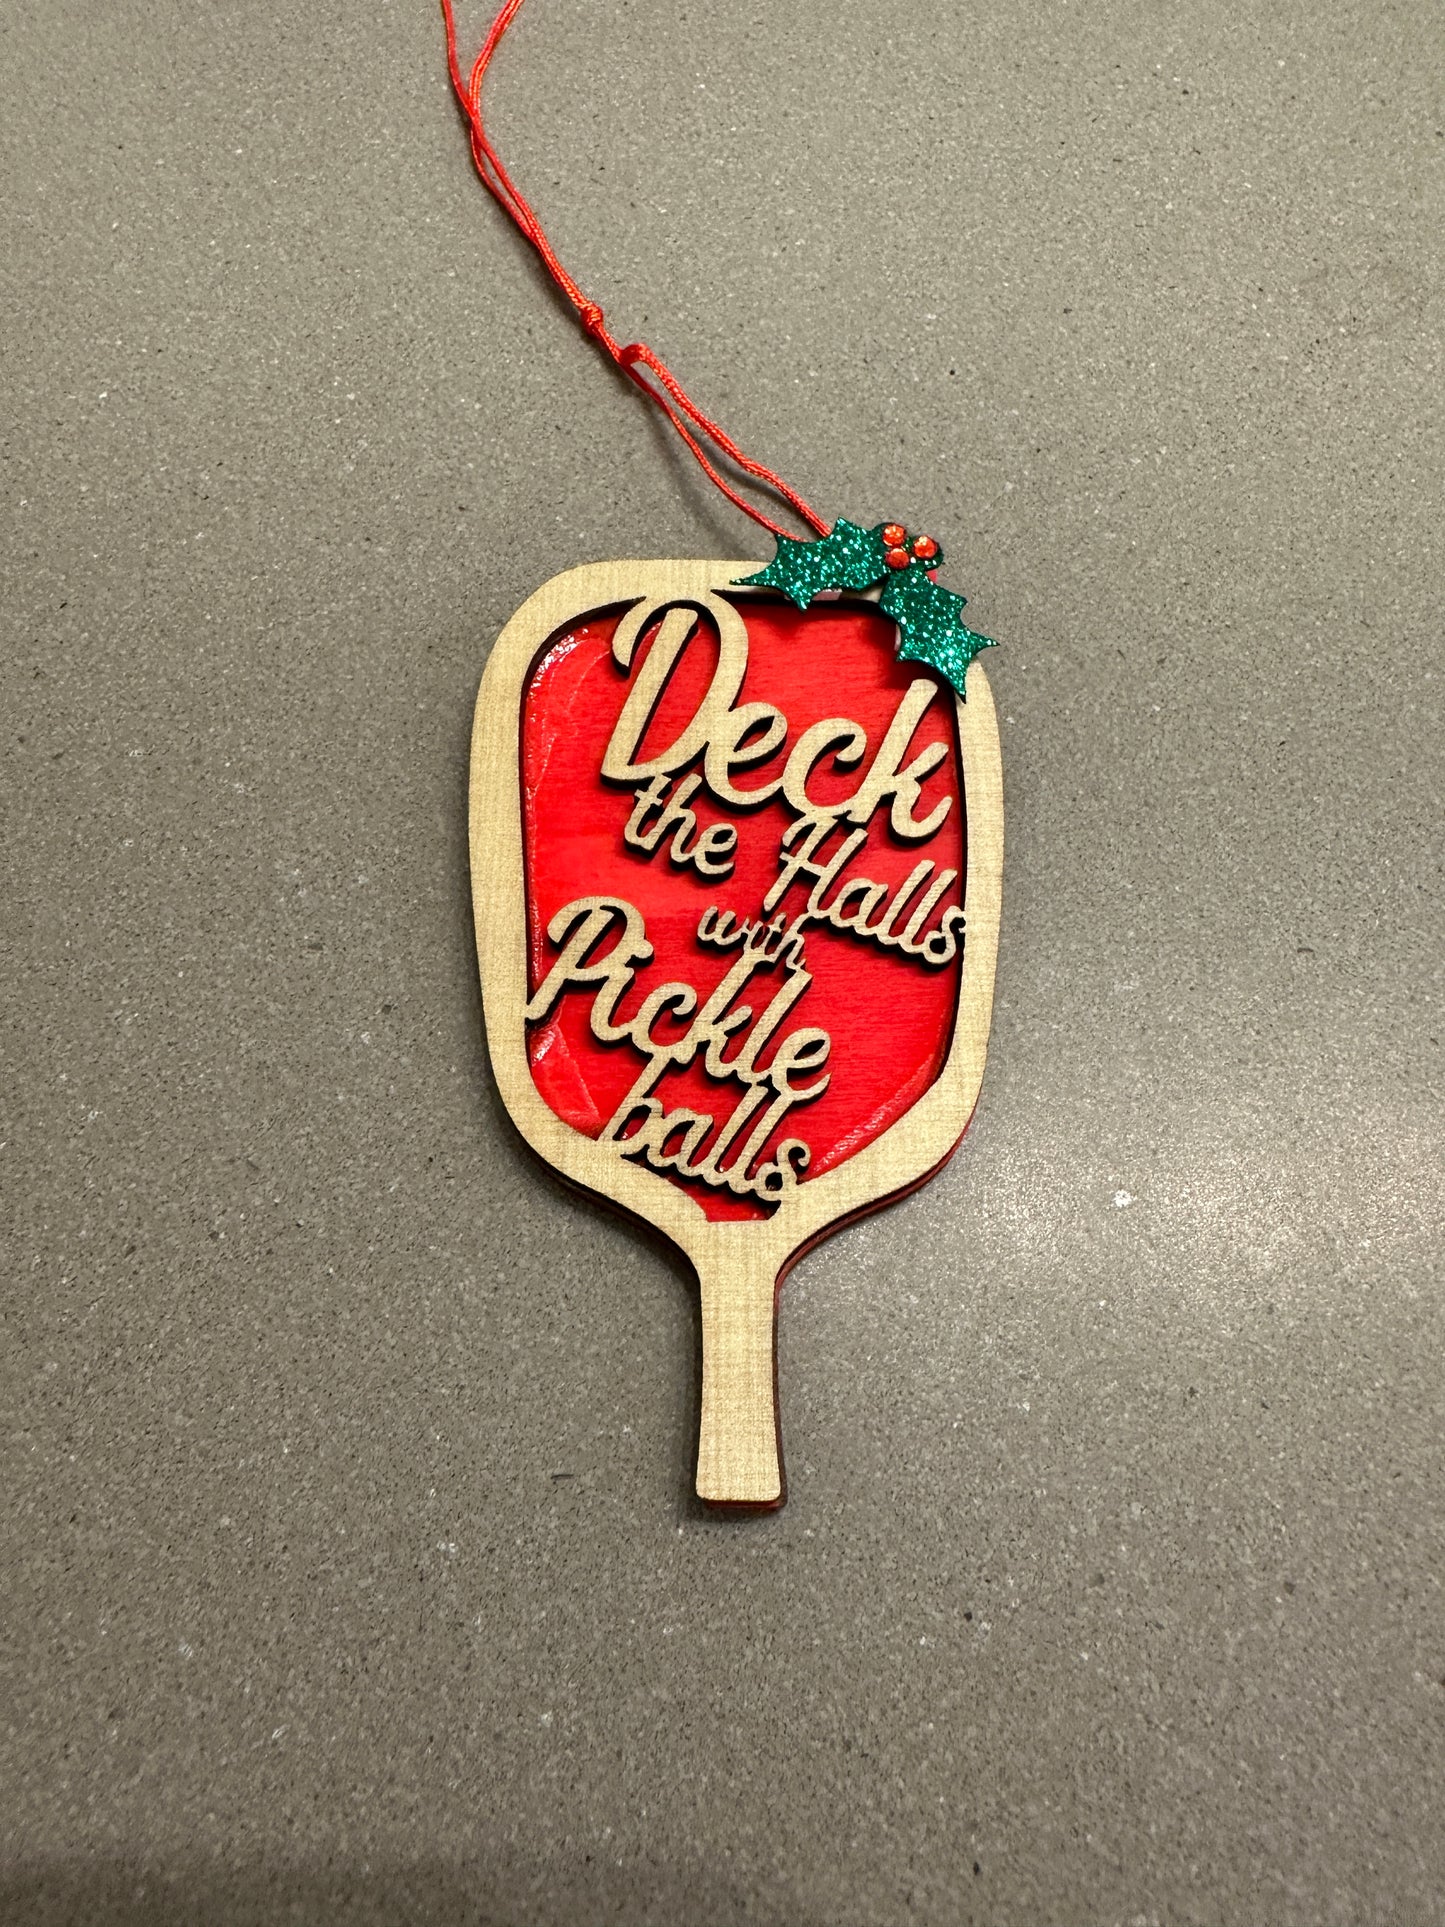 Pickleball Ornament ~ With Bag and Tag! Pickleball Christmas ~ Pickleball Gift - Pickleball Fun ~ Pickleball Holiday ~ Ships Free